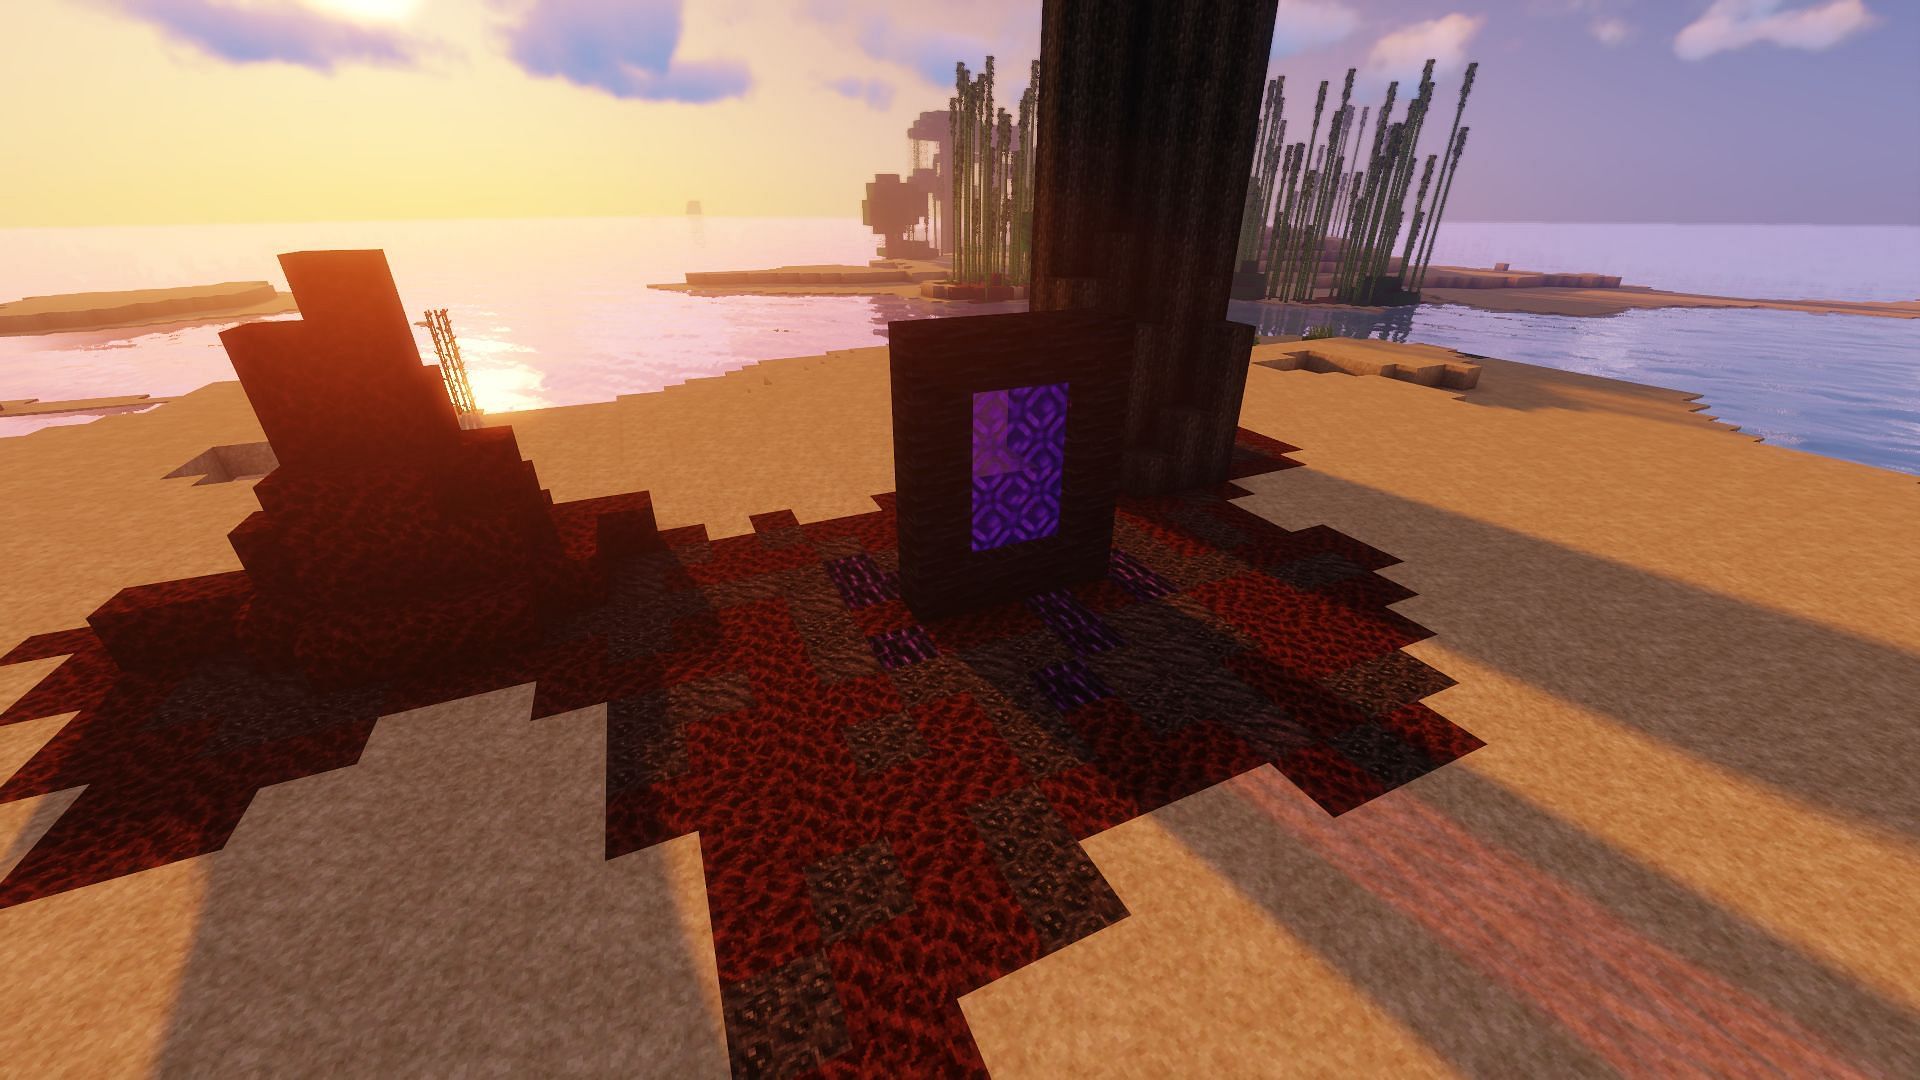 An example of an infected Nether portal (Image via Minecraft)